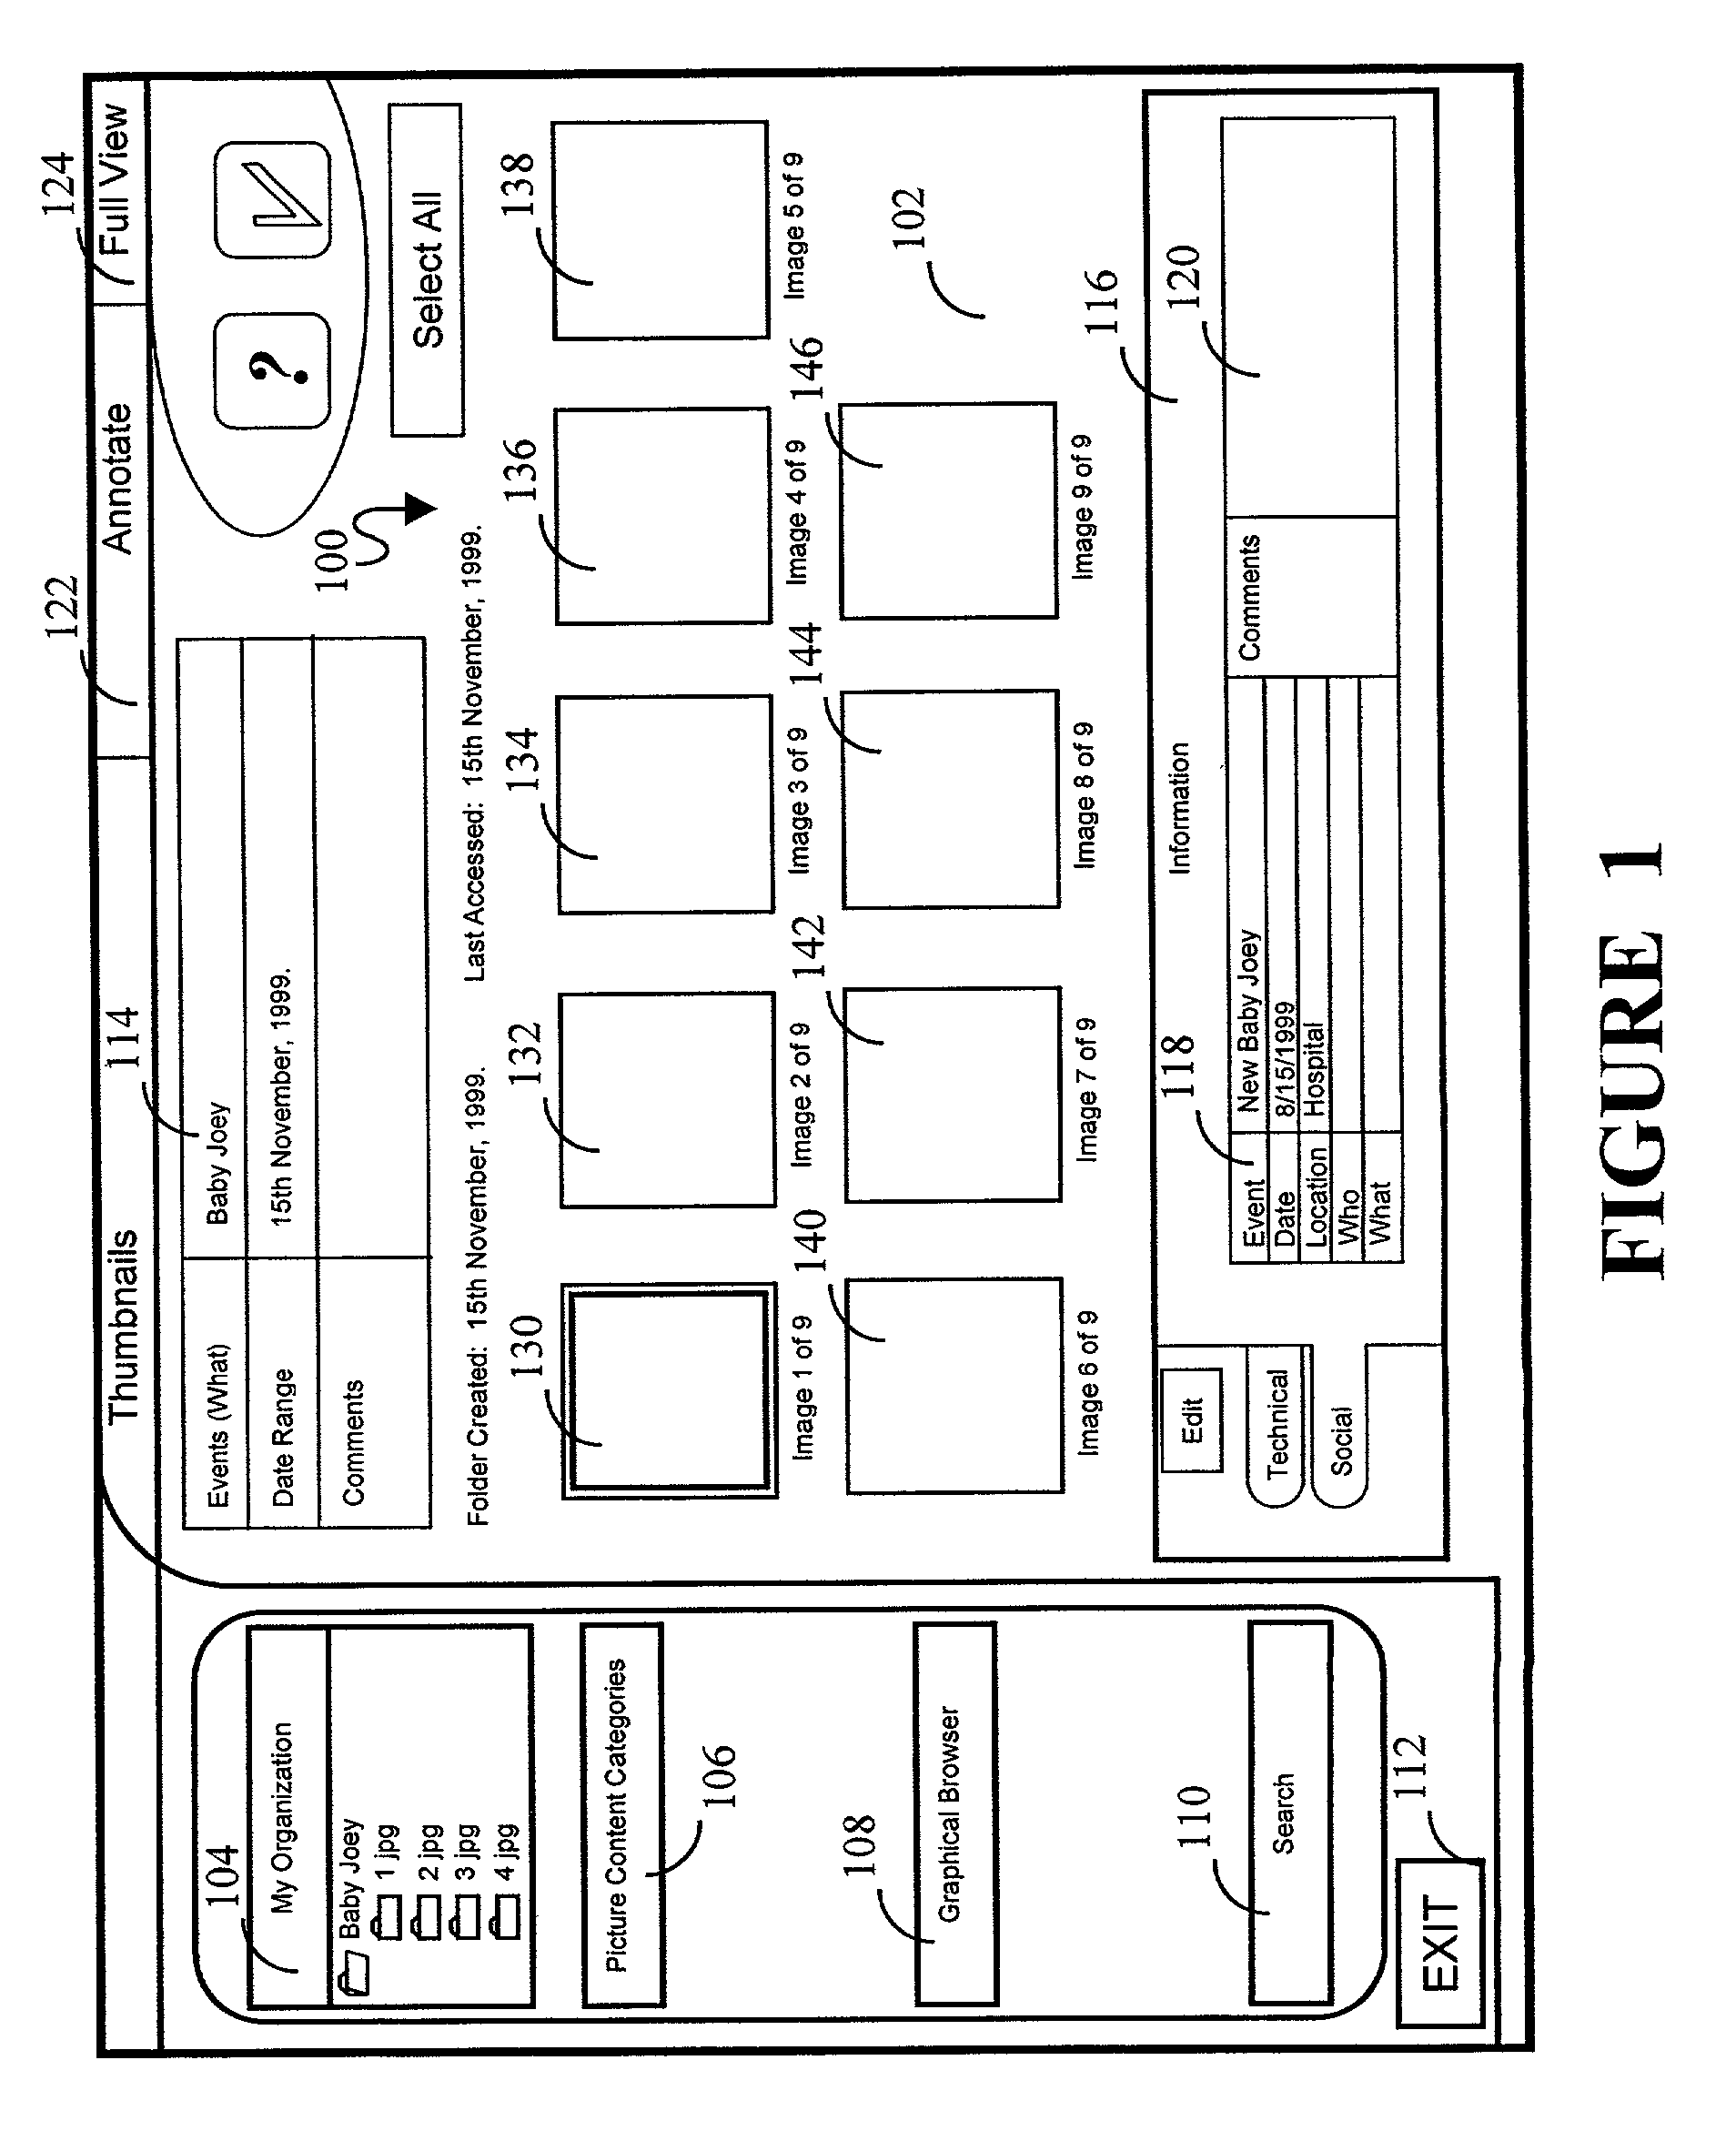 Graphical user interface adapted to allow scene content annotation of groups of pictures in a picture database to promote efficient database browsing